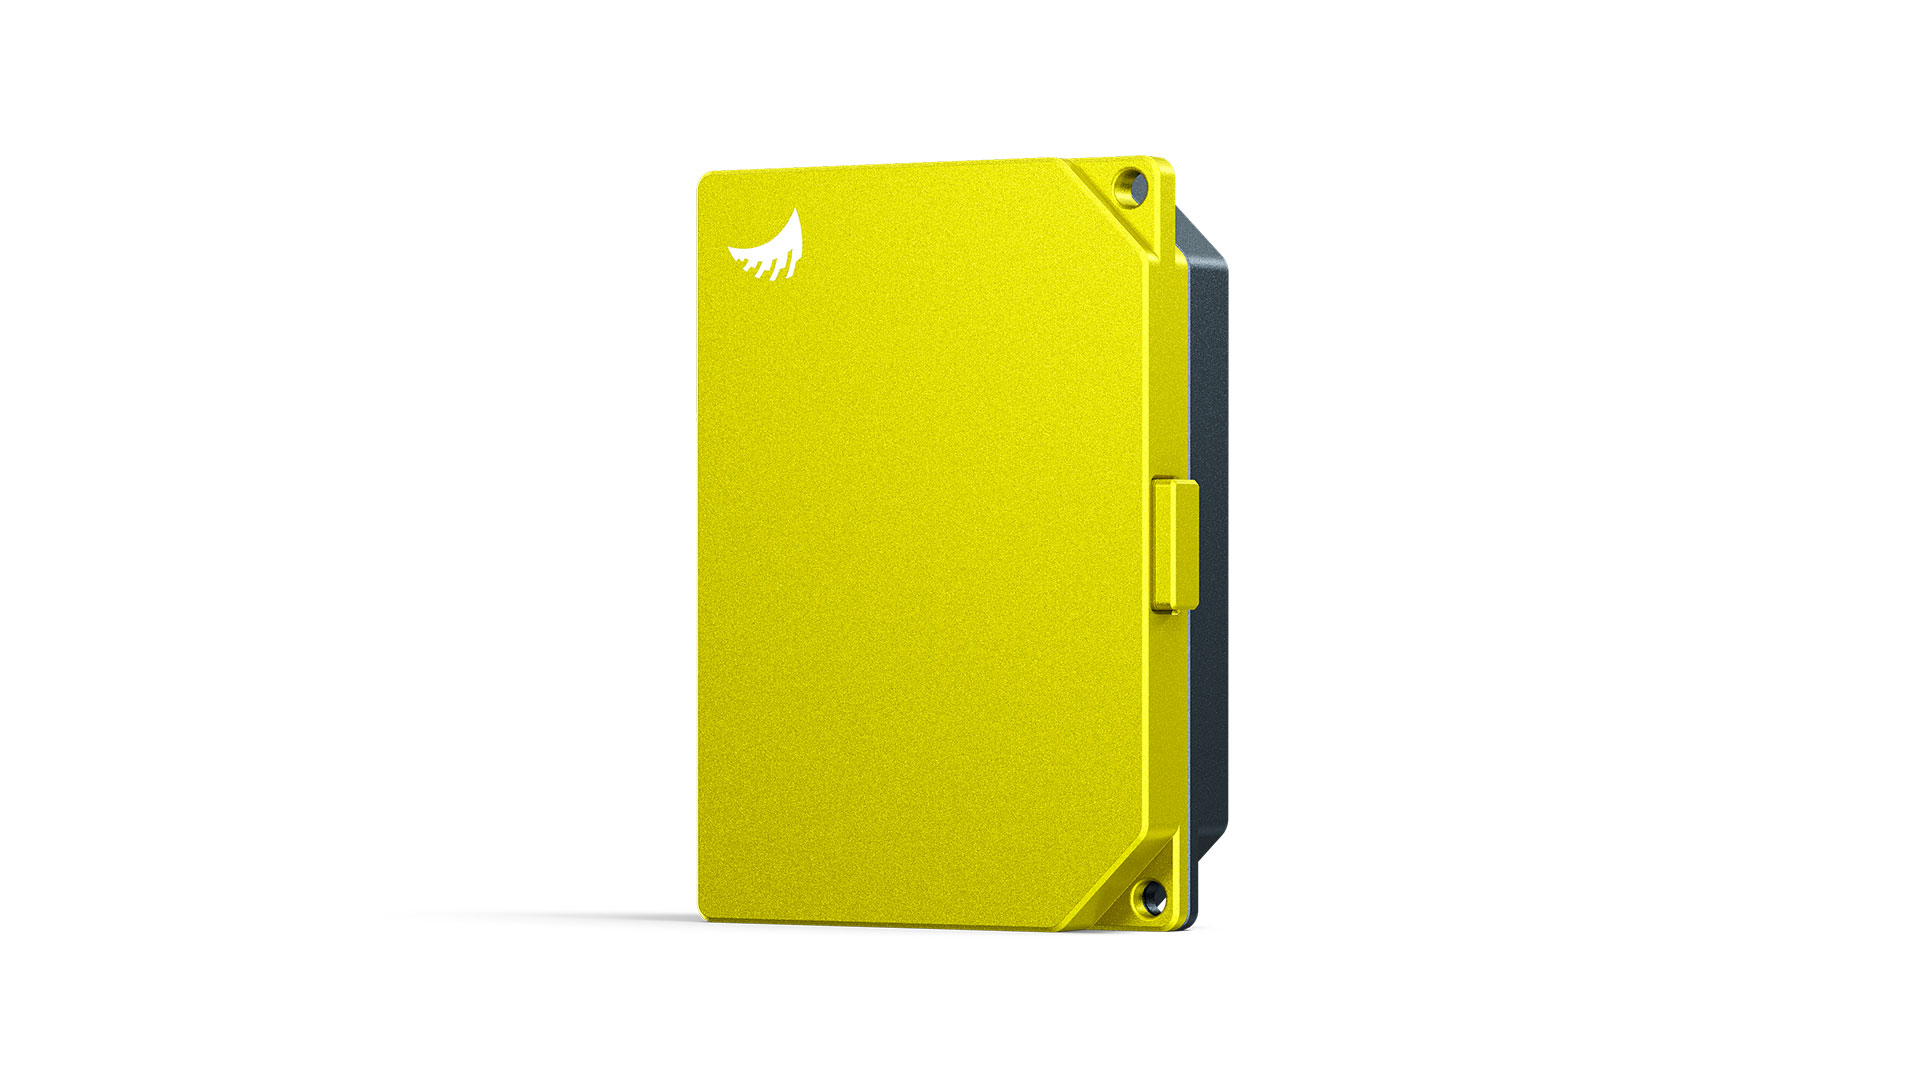 Angelbird Media Tank Launched - Robust Case for SD, CFast and